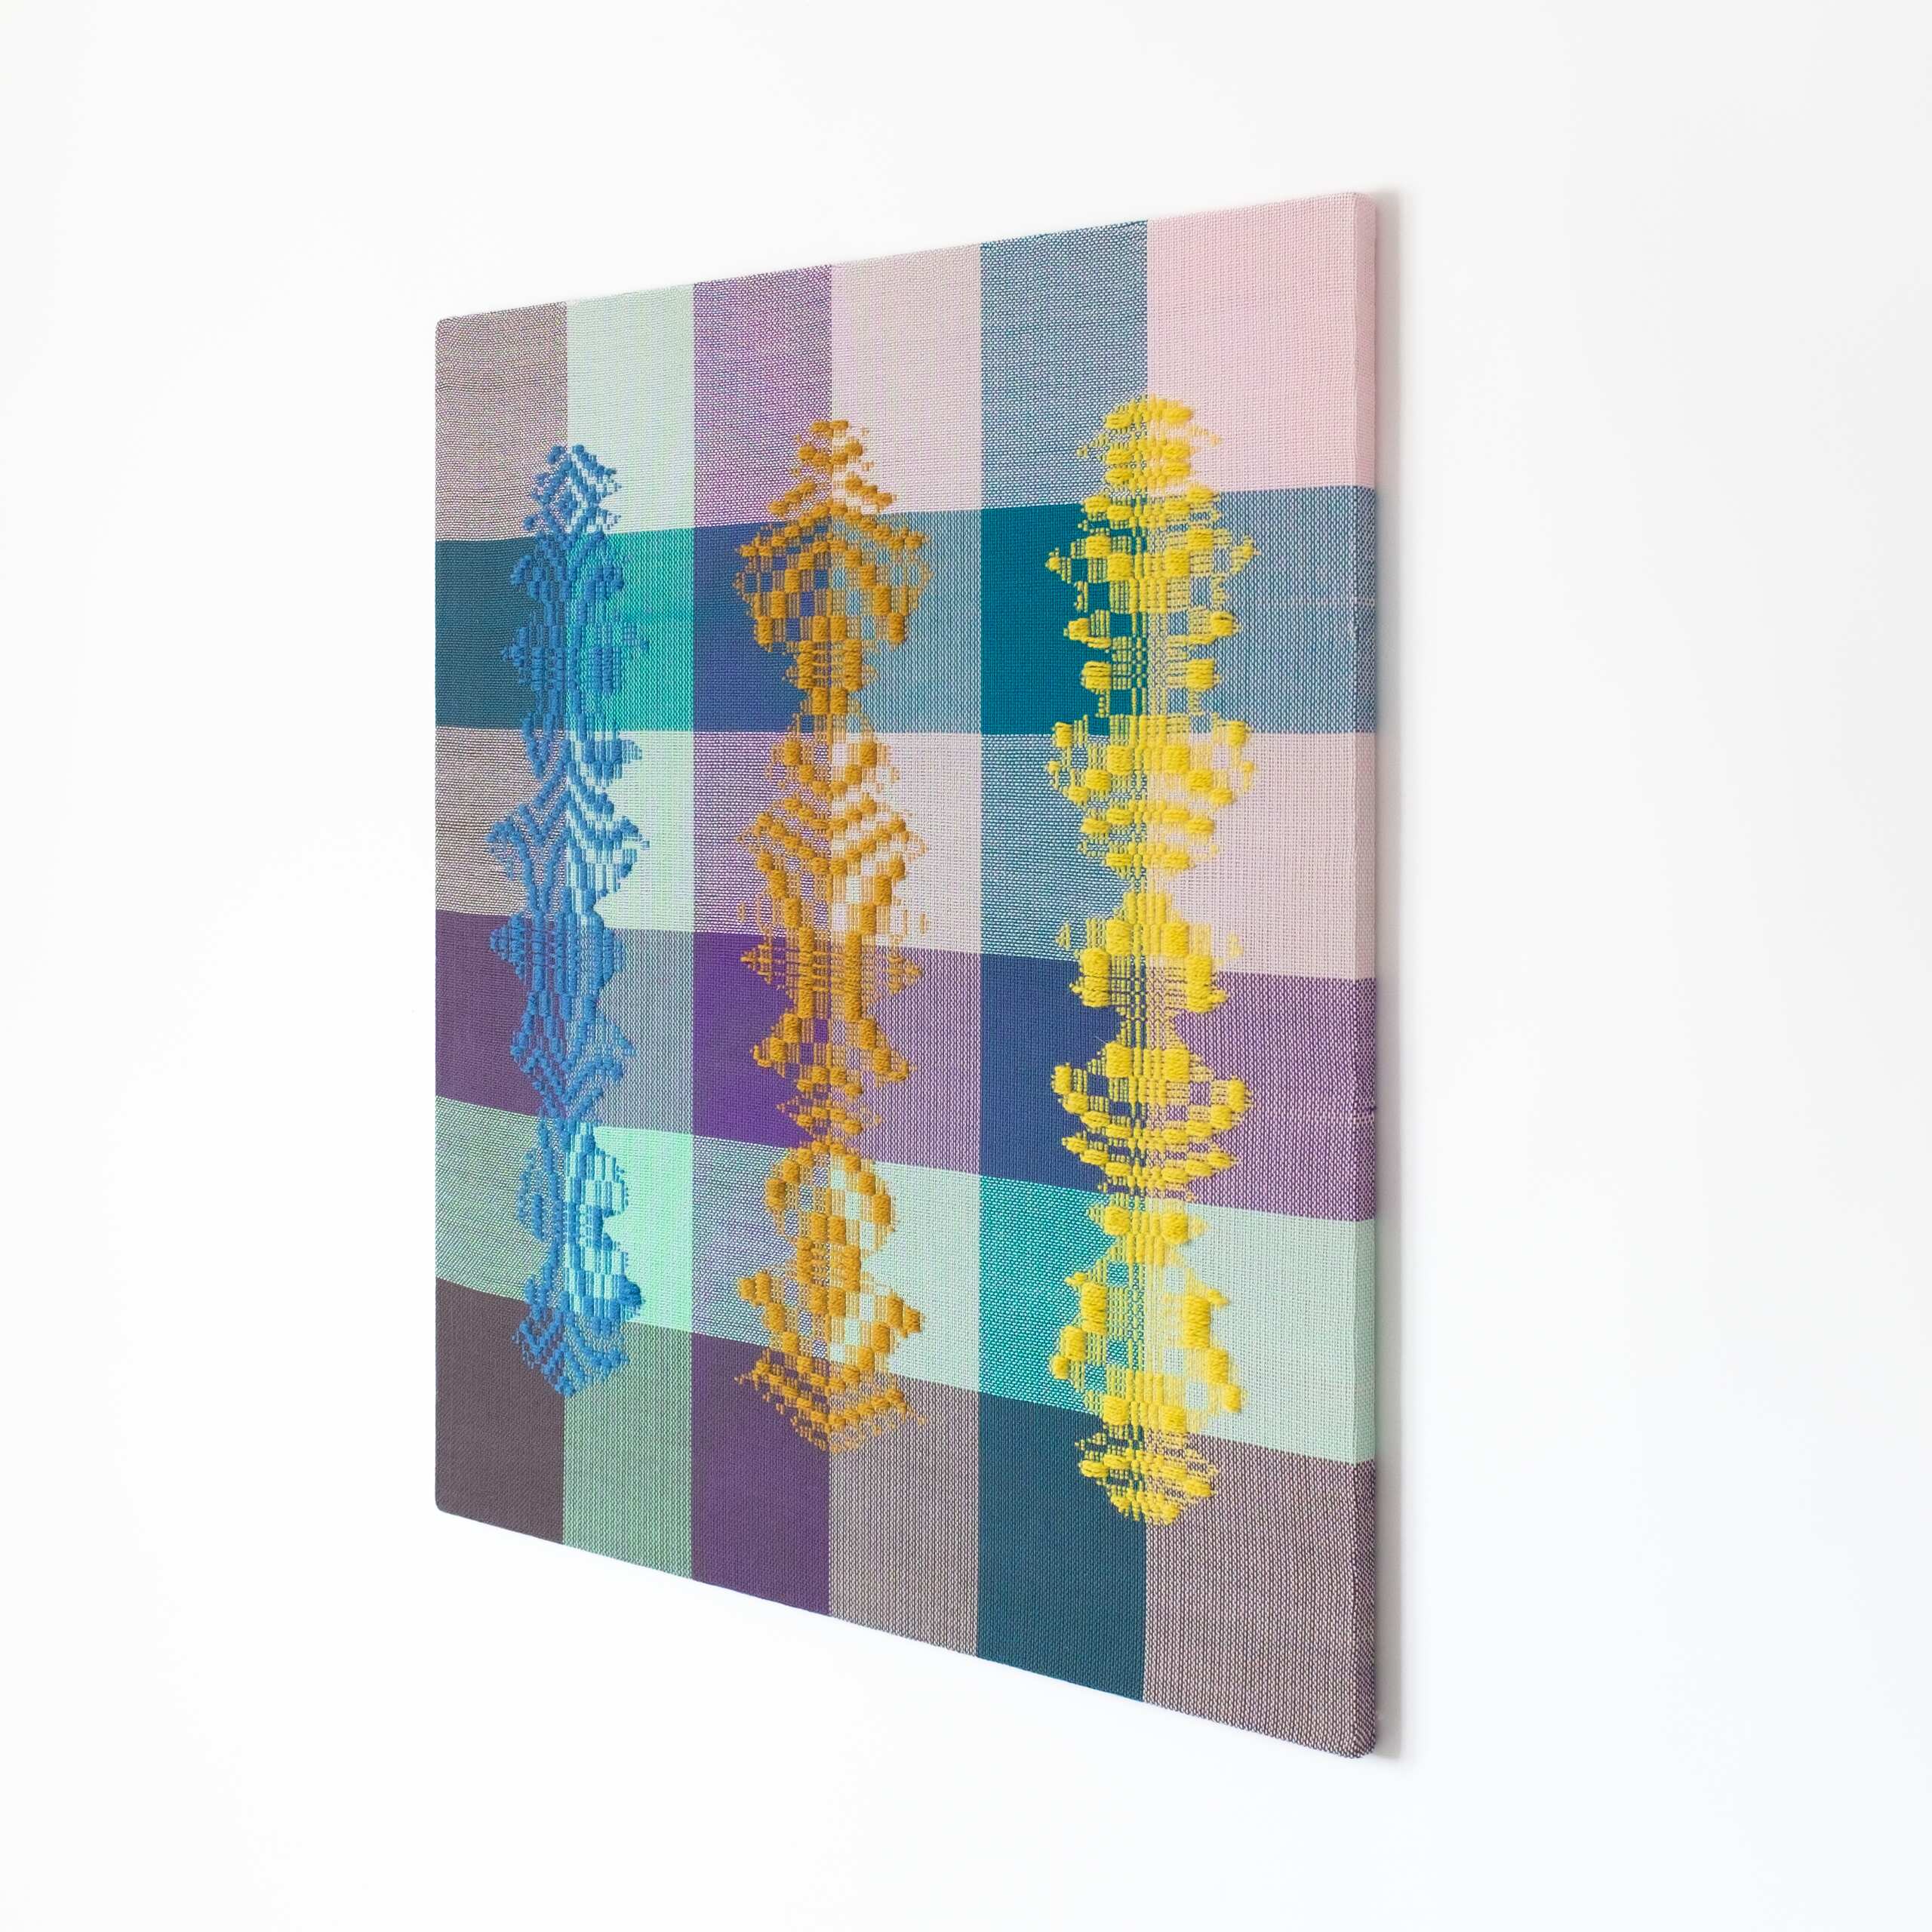 Three beings [blue-bronze-yellow on high-contrast ground], Hand-woven cotton and wool yarn, 2022